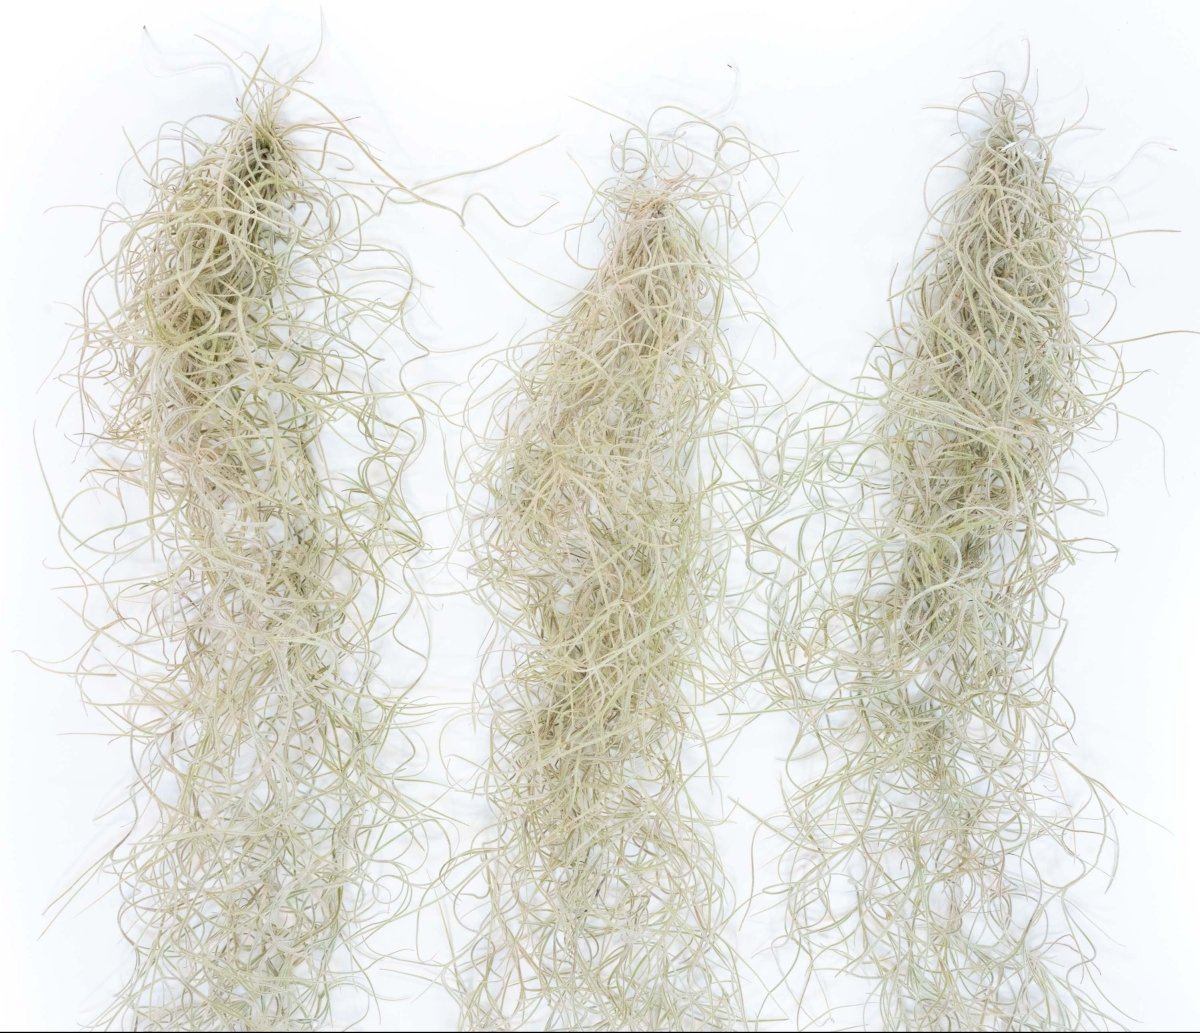 Air Plant Supply Co. Tillandsia Guatemala Gray Spanish Moss, 1 Ft Clump Strands - lily & onyx